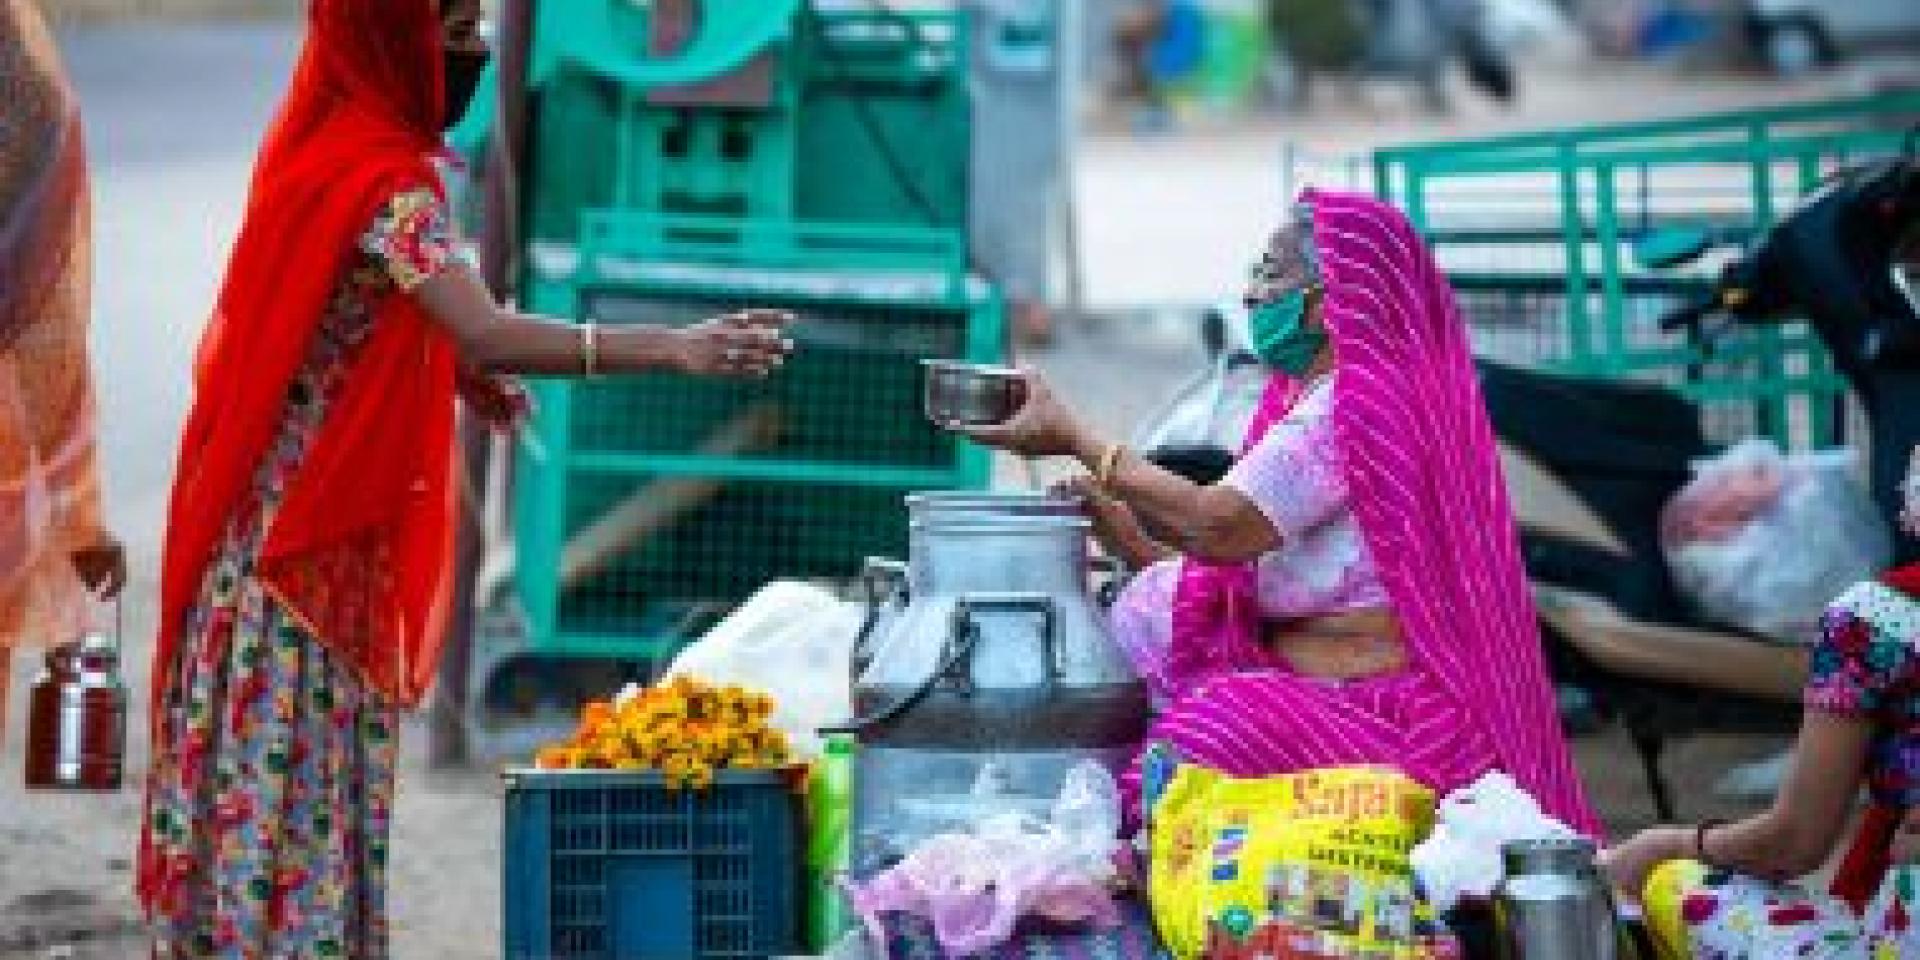 A woman buying food from a vendor